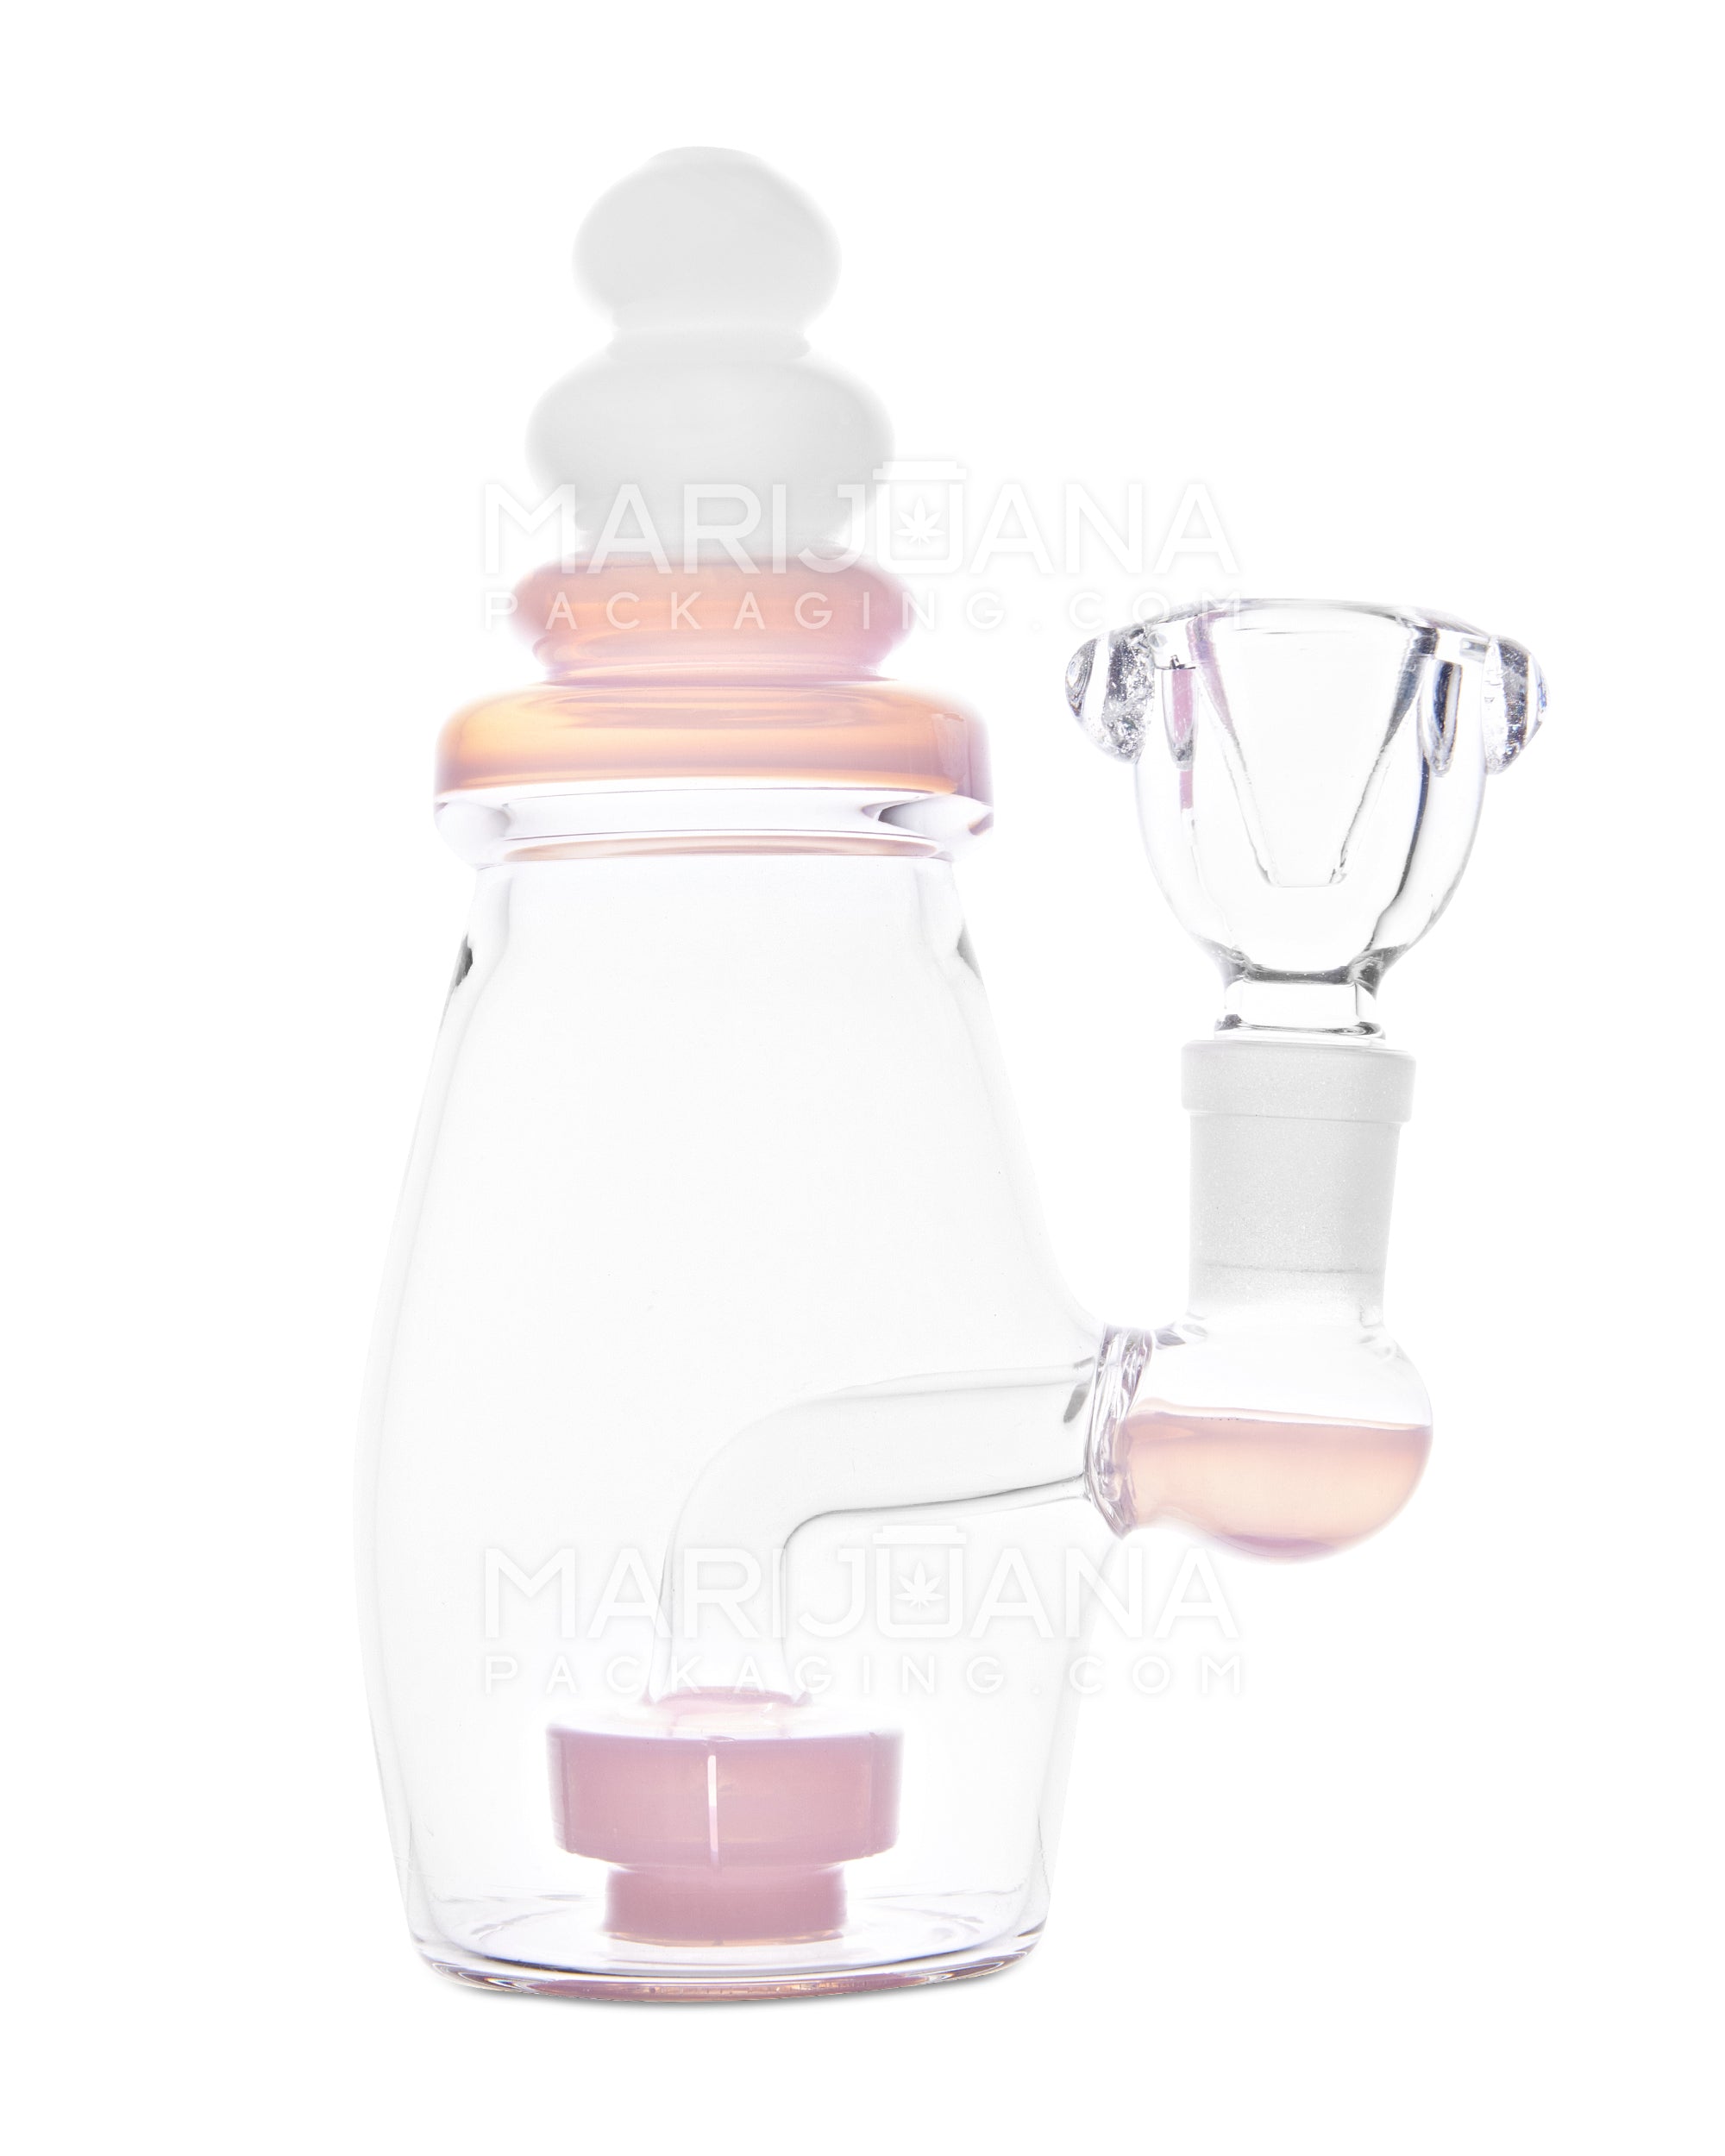 USA Glass | Straight Neck Baby Bottle Water Pipe w/ Showerhead Percolator | 6in Tall - 14mm Bowl - Pink